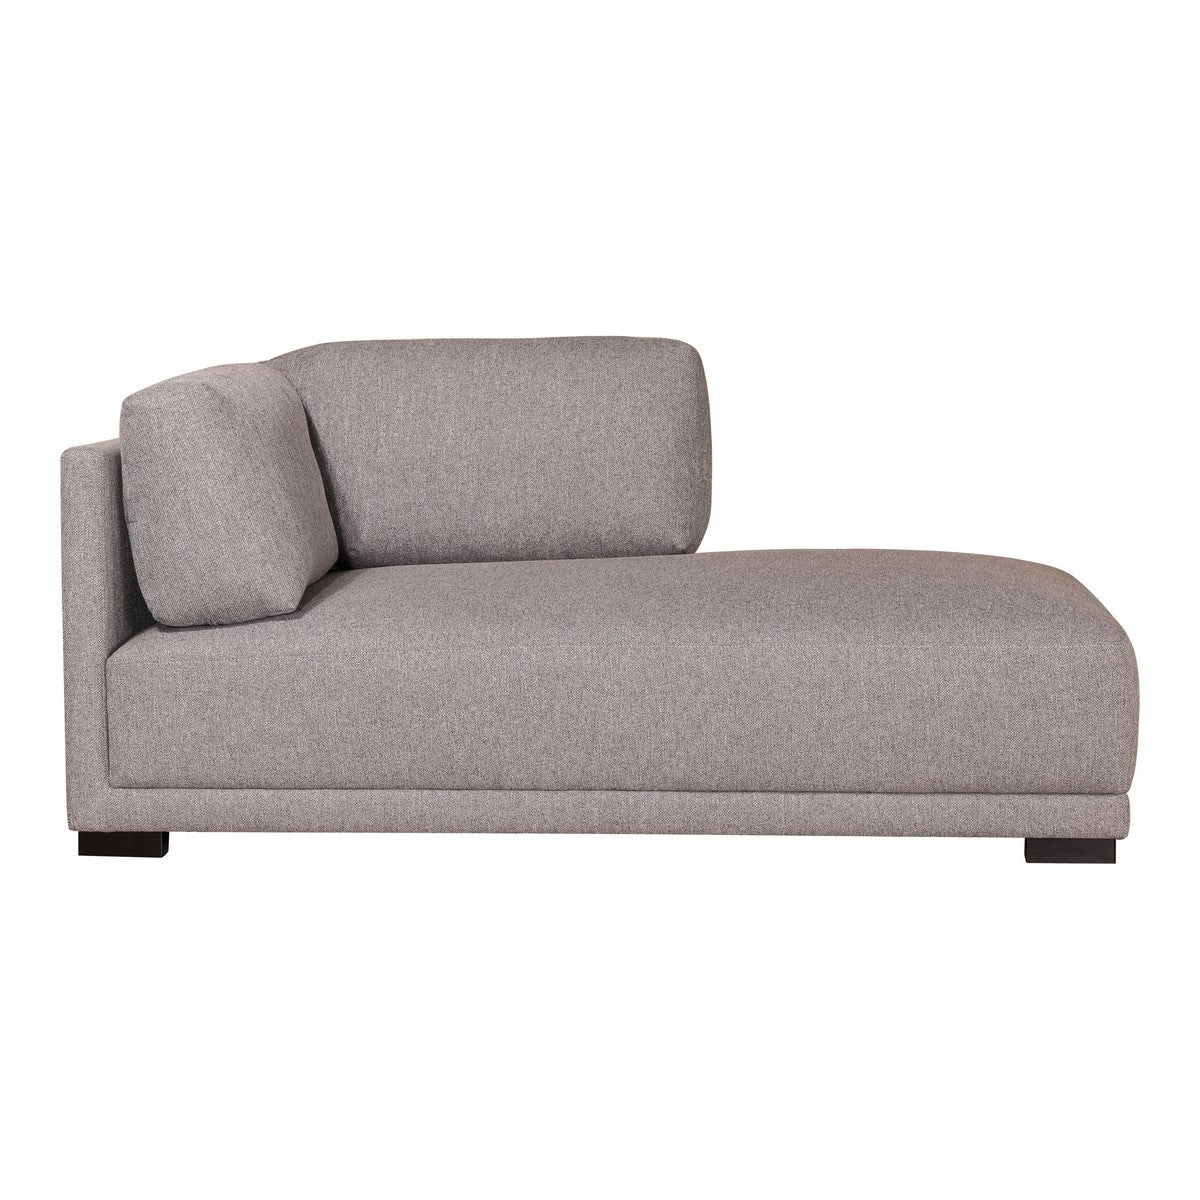 Moe's Home Collection Romeo Chaise Right Grey - RN-1118-29